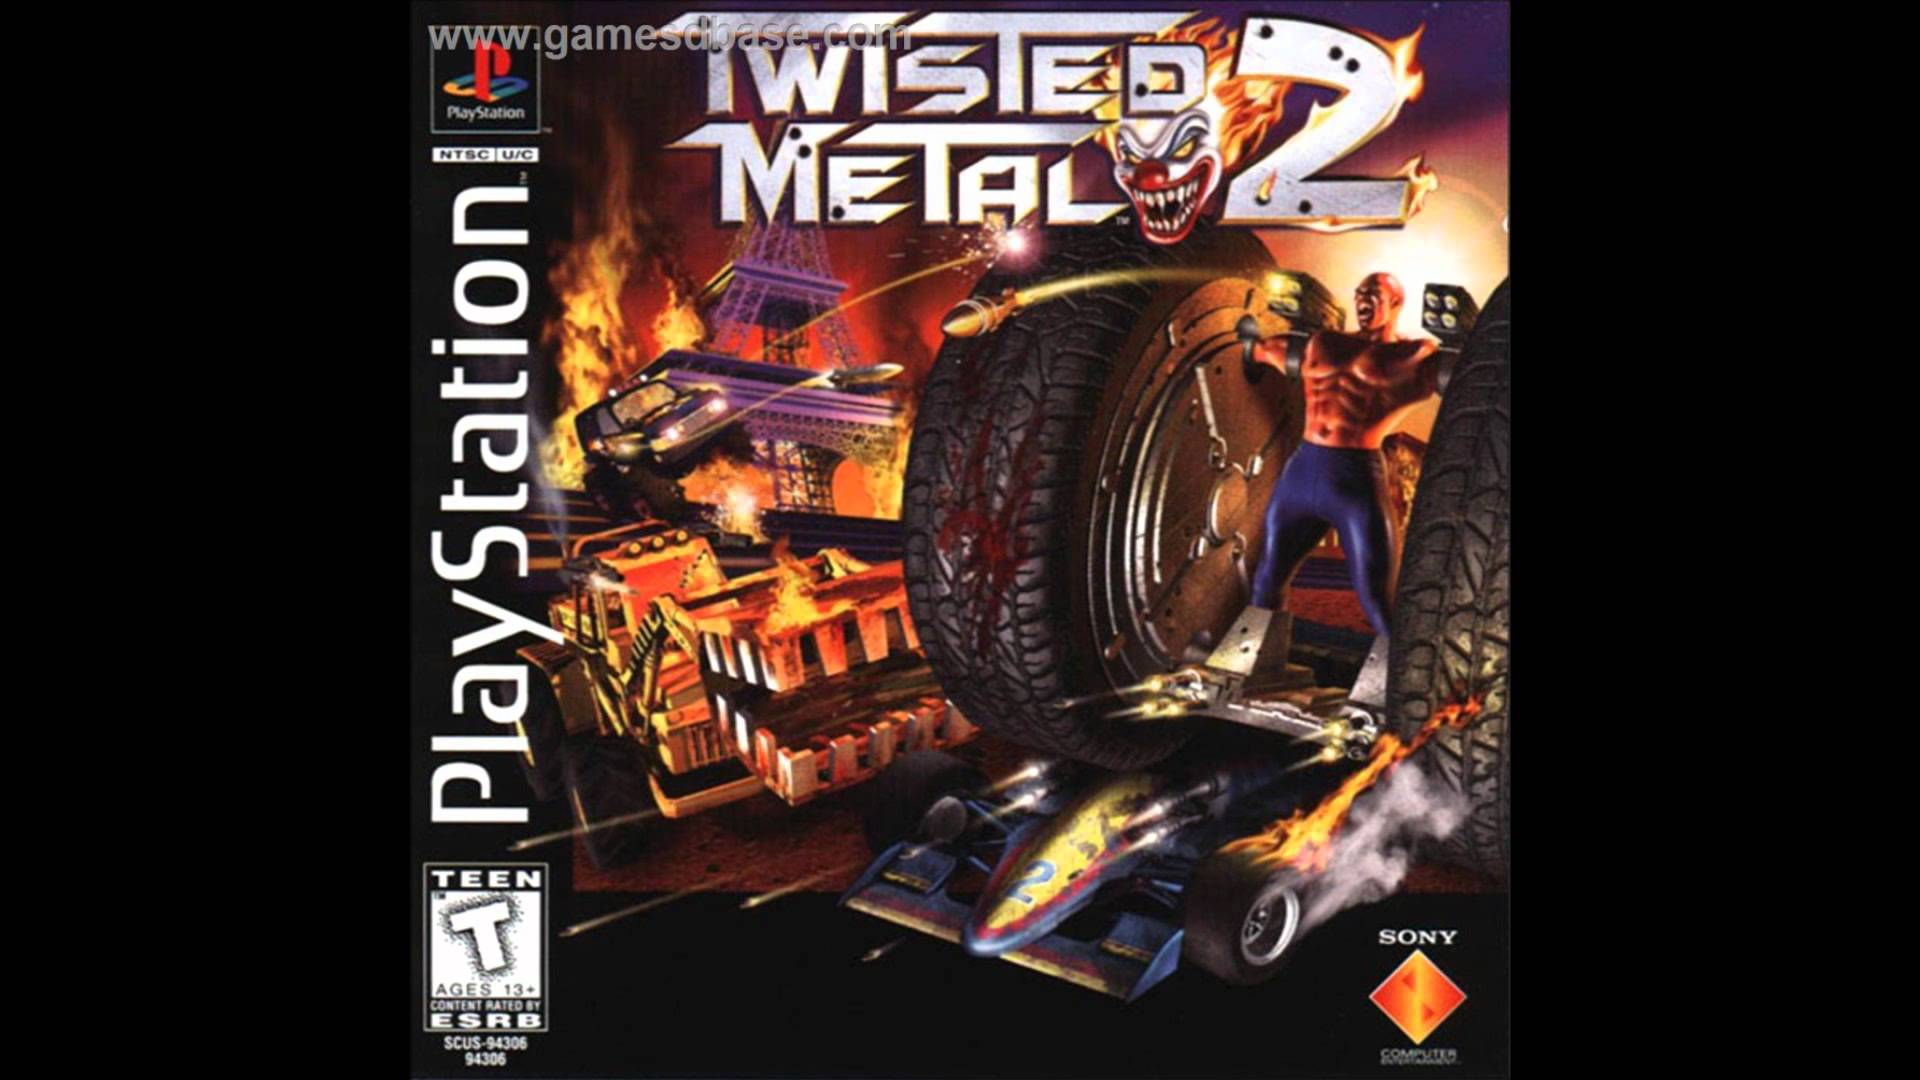 Twisted Metal 2: Full Game Soundtrack - YouTube